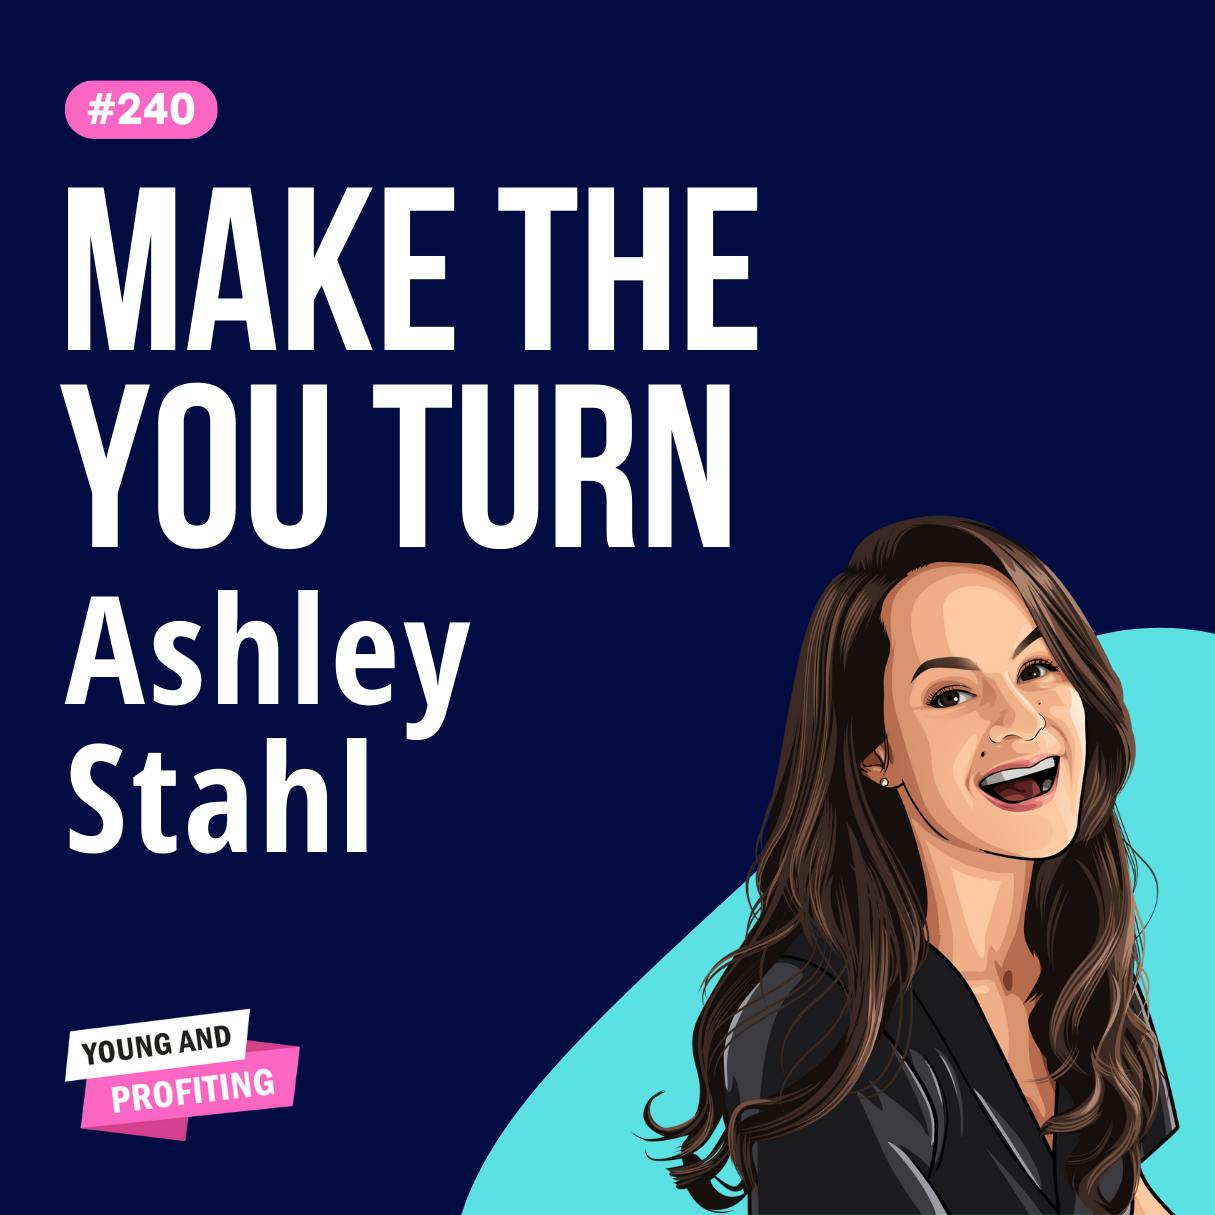 Ashley Stahl: The Road to Self-Discovery, Uncover Your Core Skills and Values for Career Success | E240 by Hala Taha | YAP Media Network